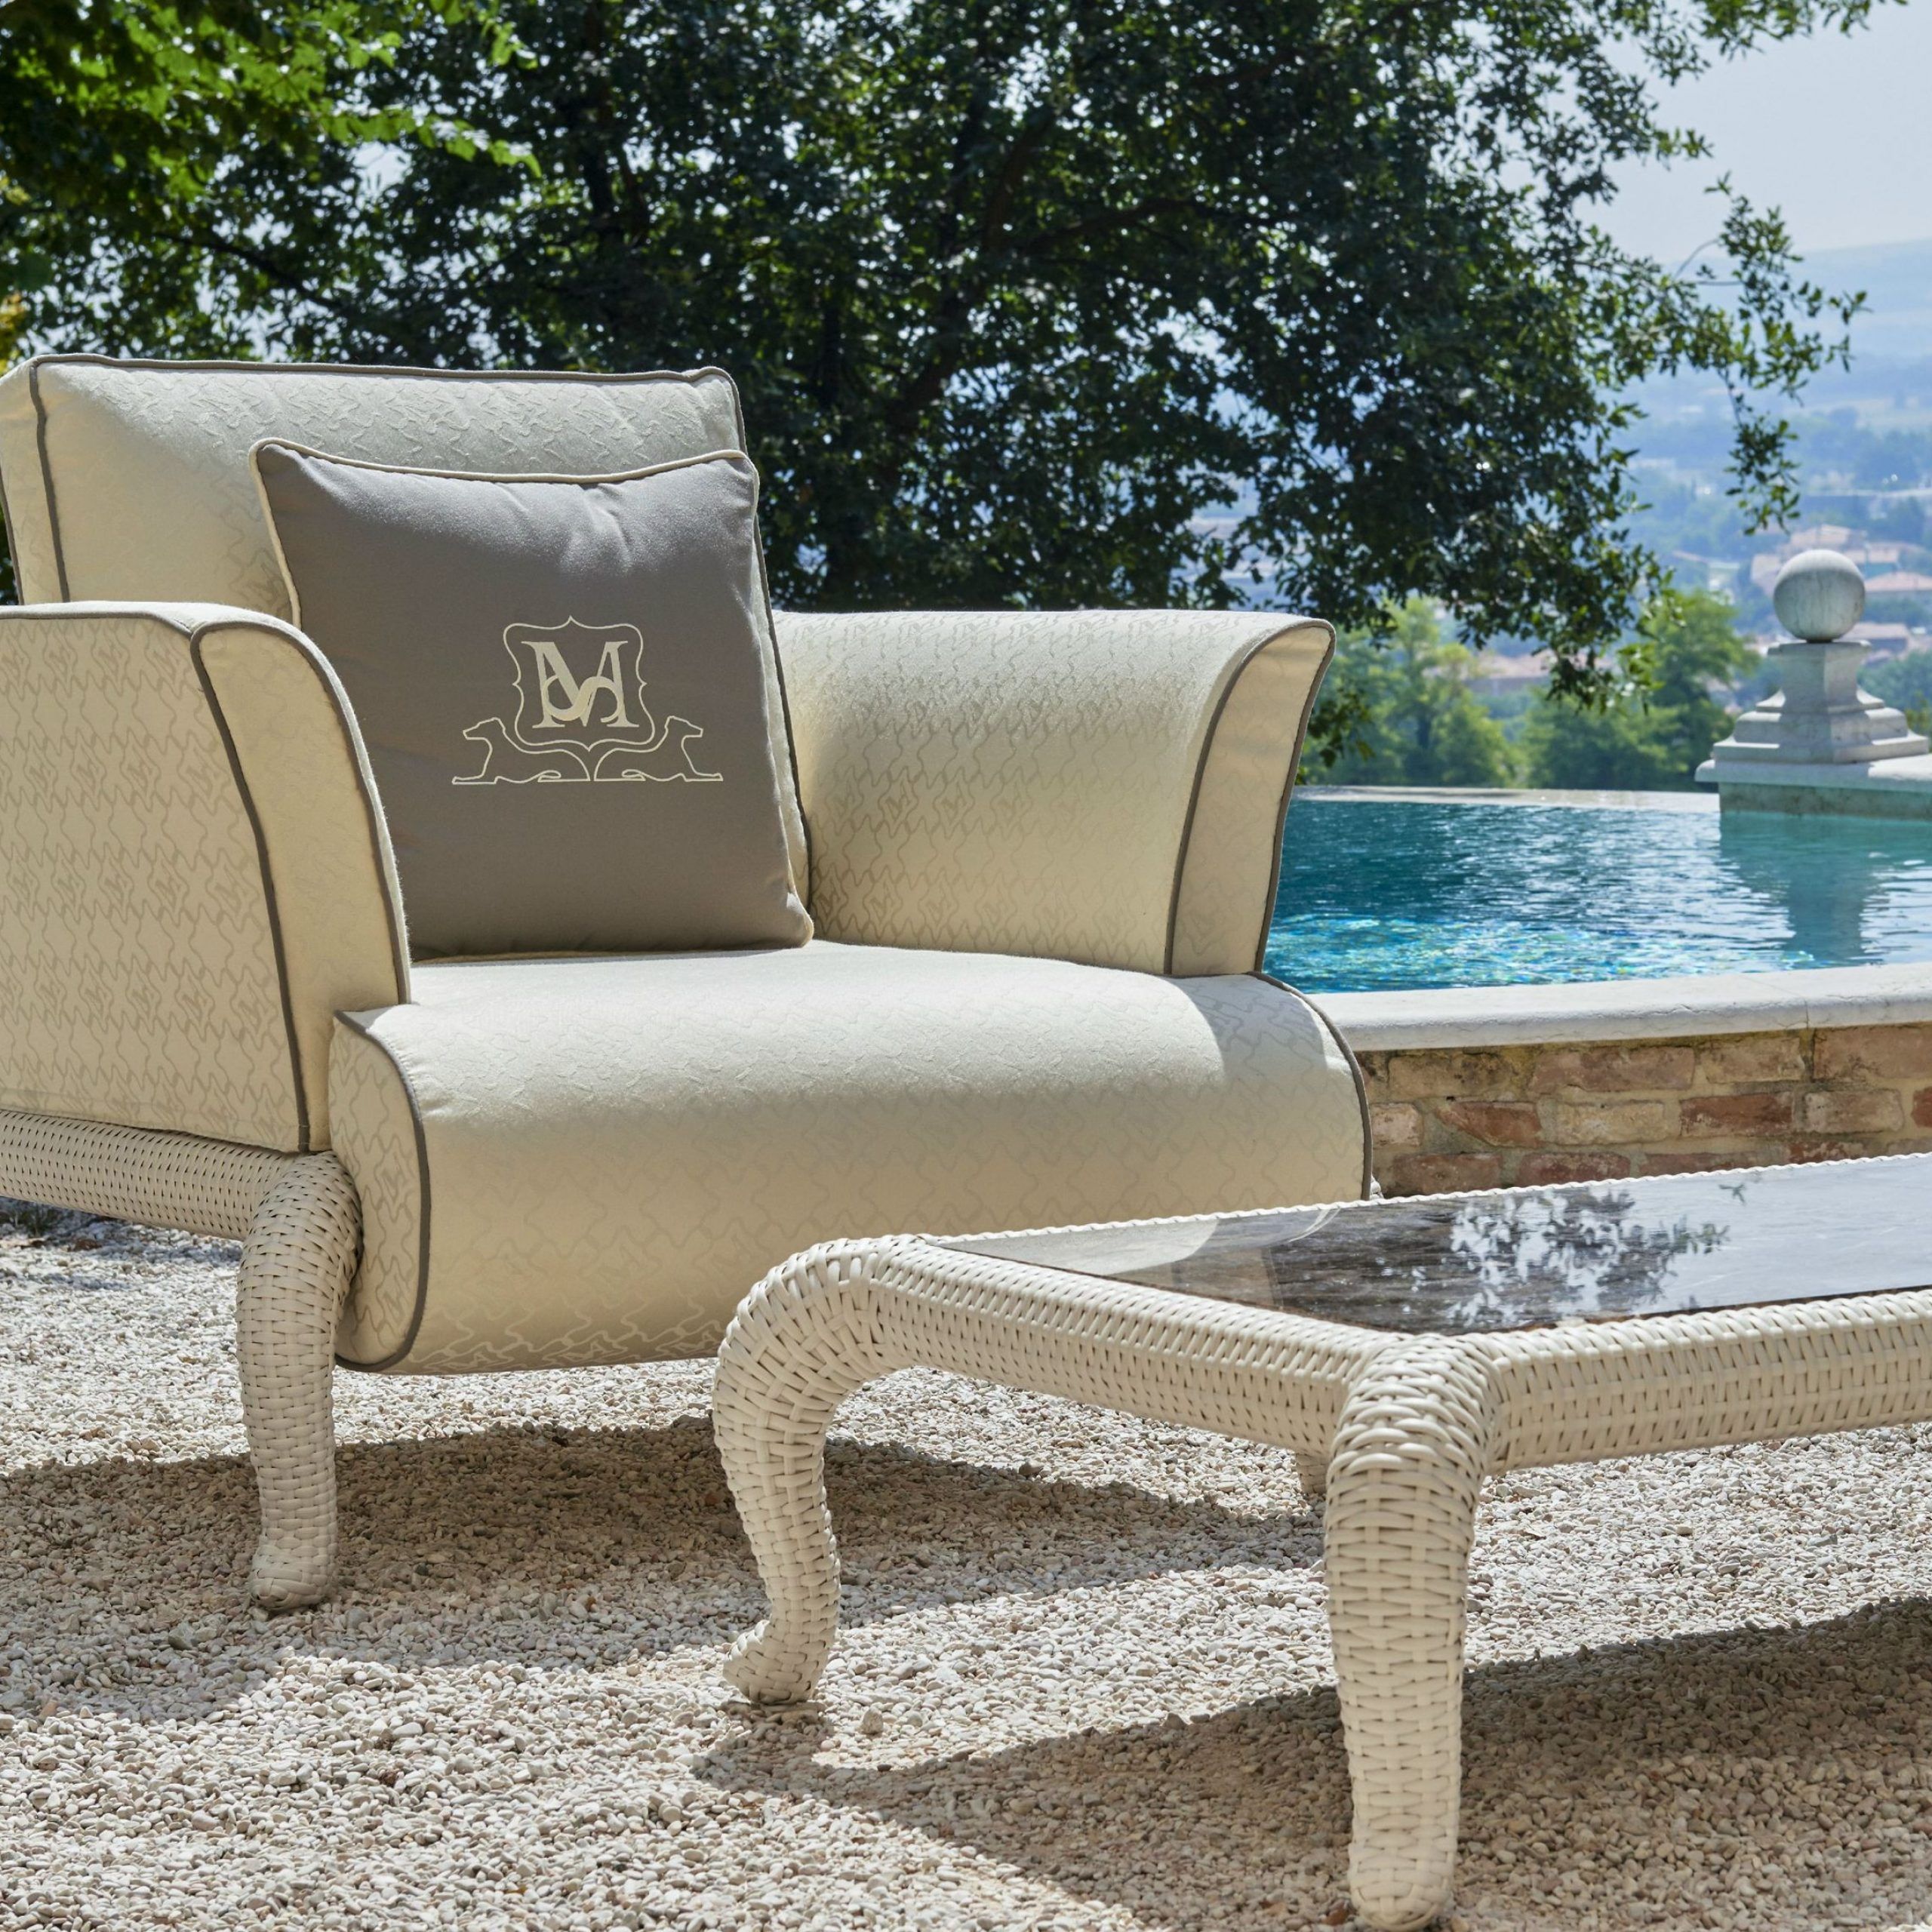 Canopo Garden Armchairsamuele Mazza Outdoor Collectiondfn Within Outdoor Armchairs (View 9 of 15)